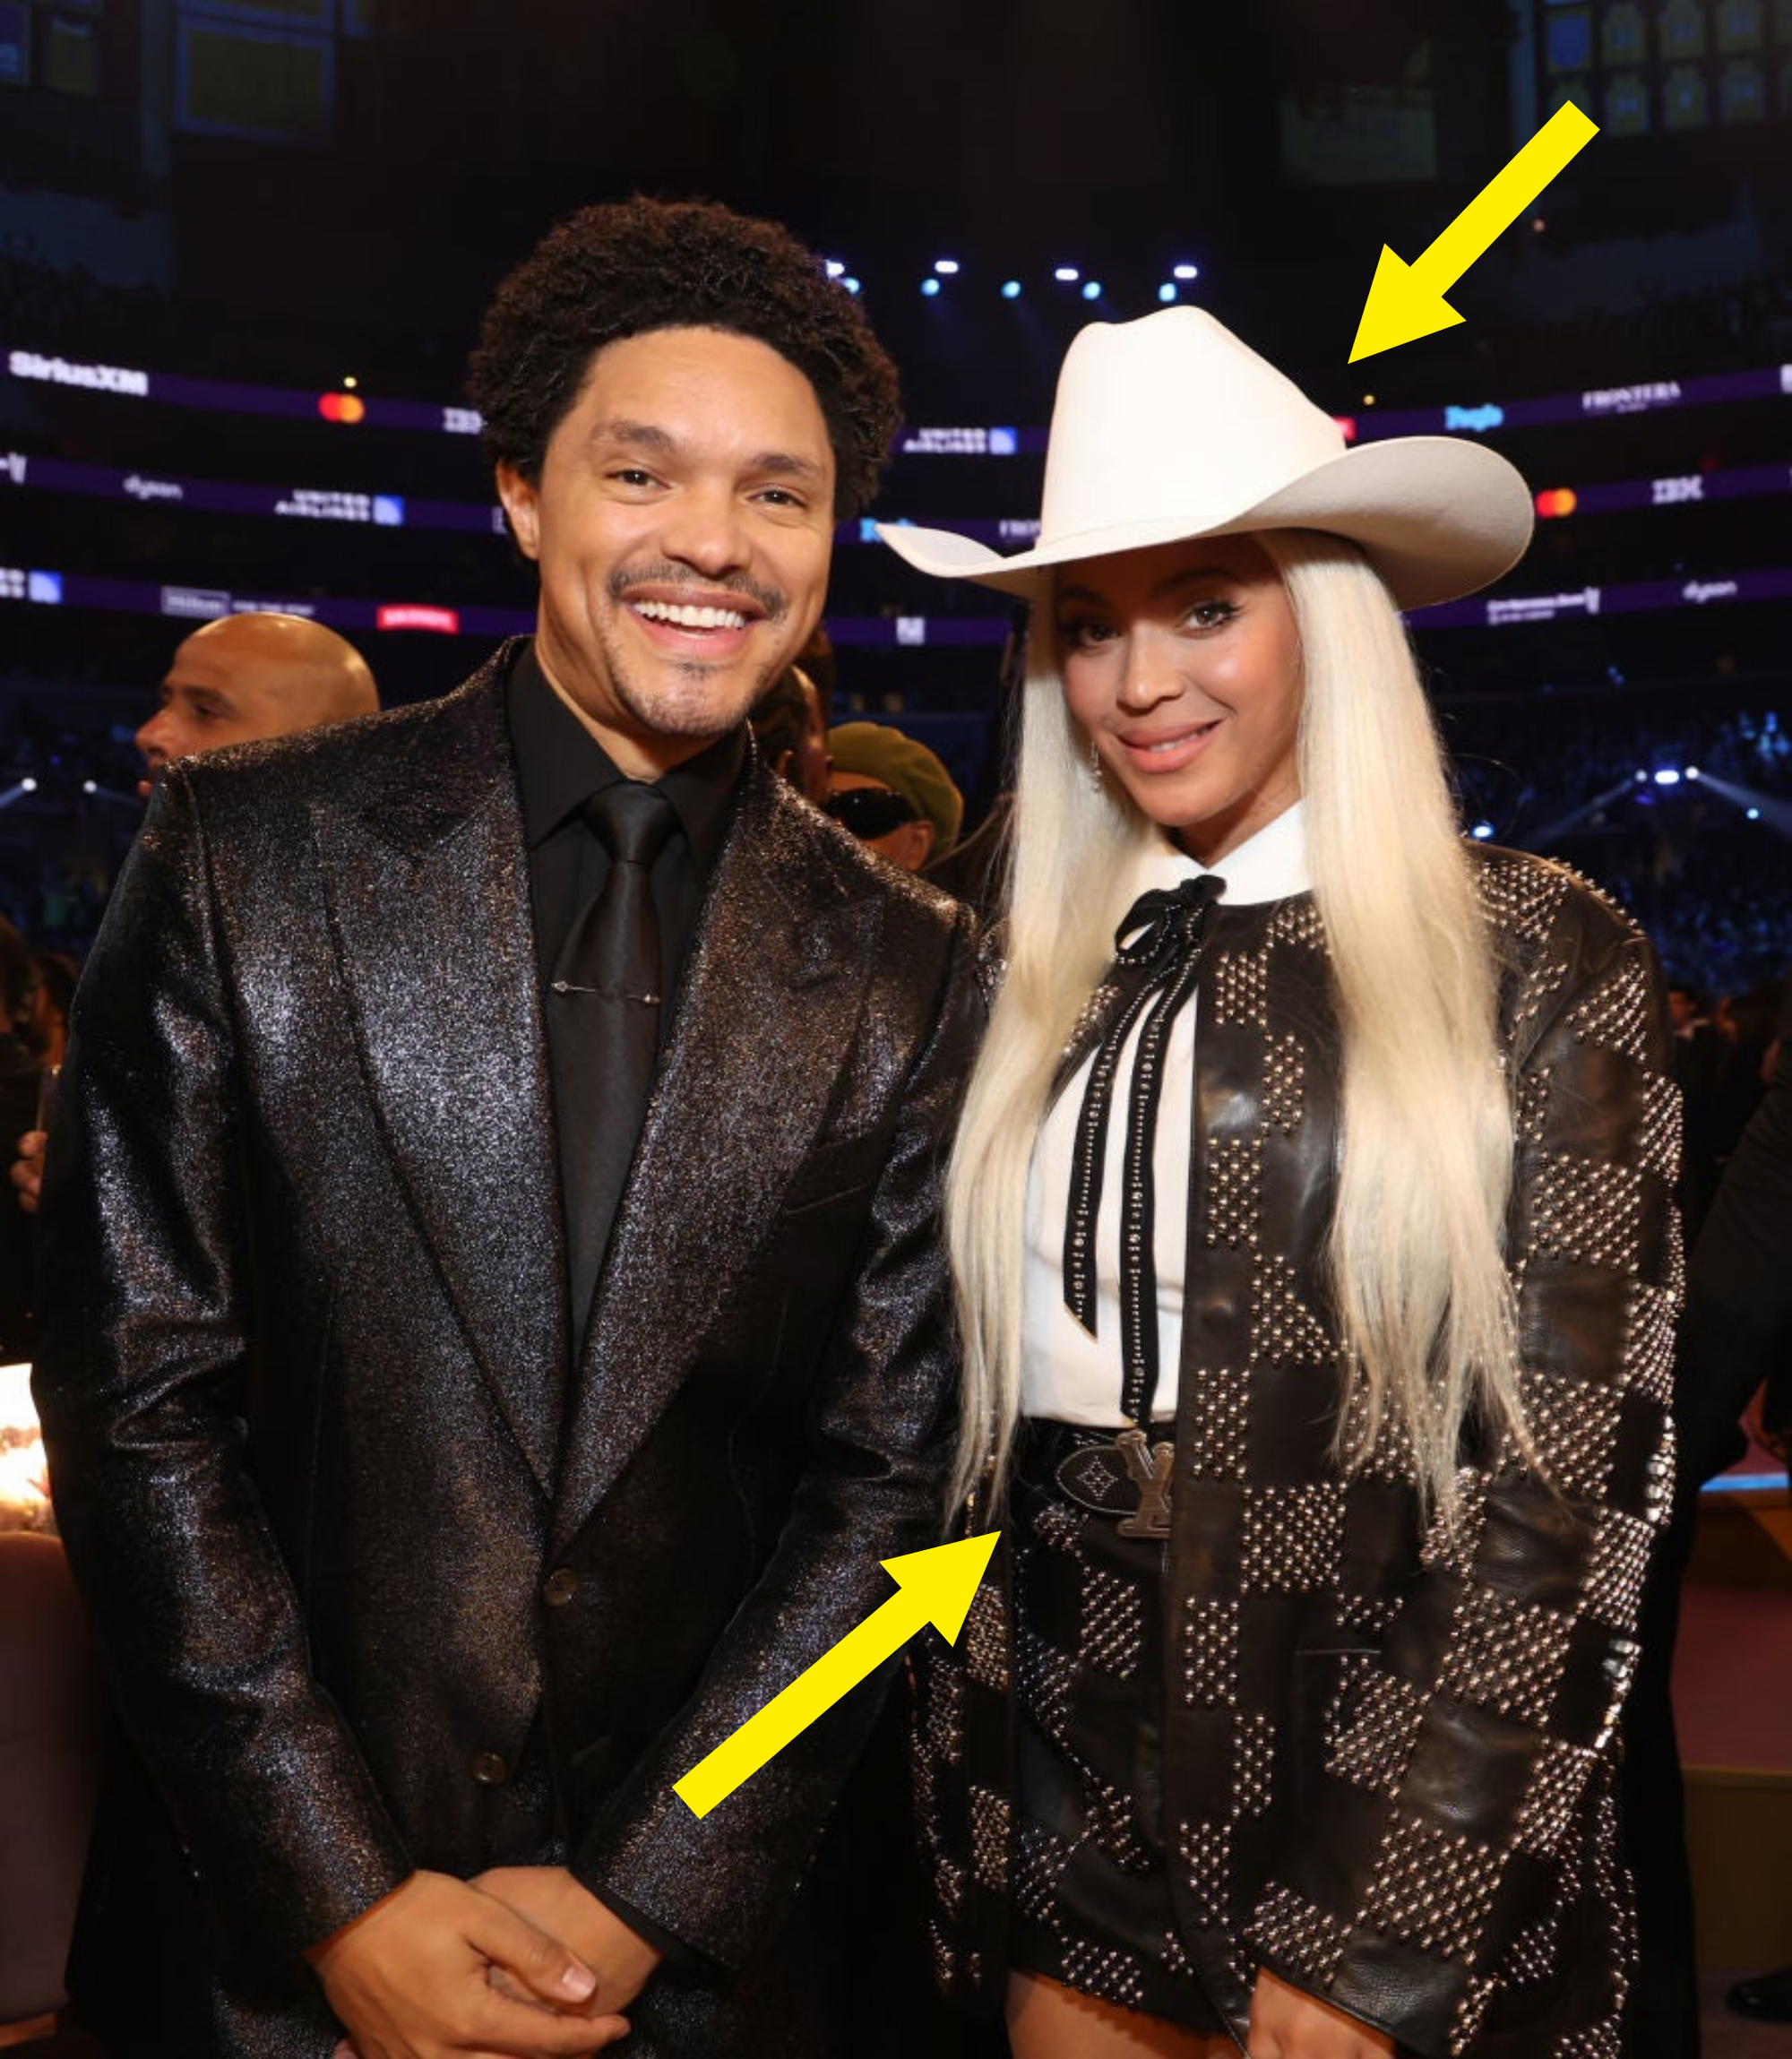 Trevor Noah in a glittering suit and Beyoncé in a studded outfit with a cowboy hat smile for a photo